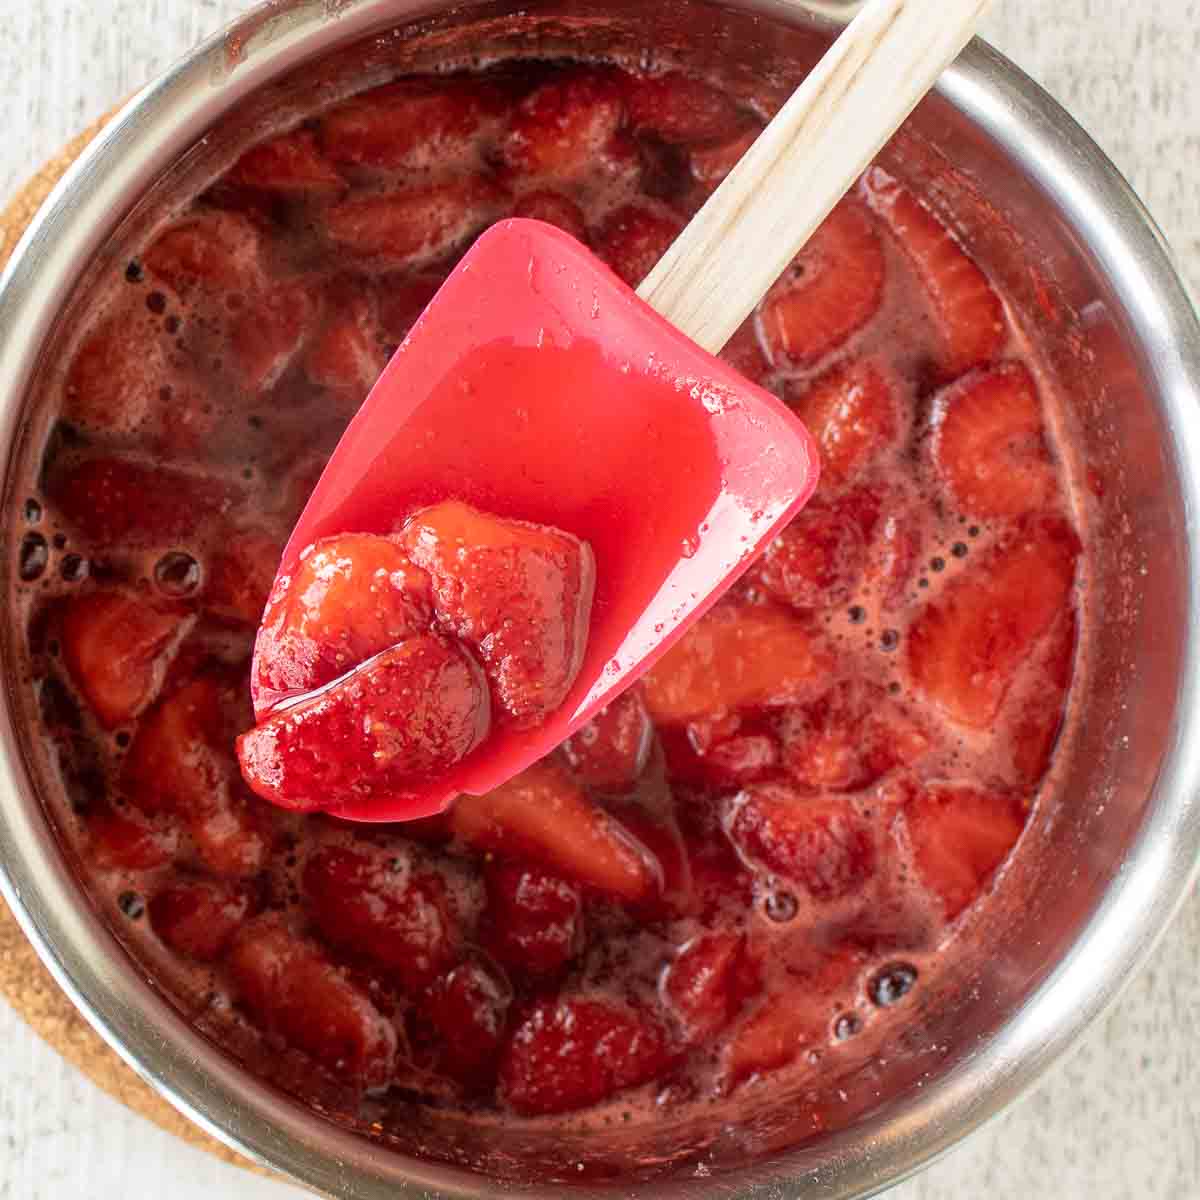 A spoonful of cooked strawberries on a red spatula viewed from above and held over a pot of cooked strawberries.